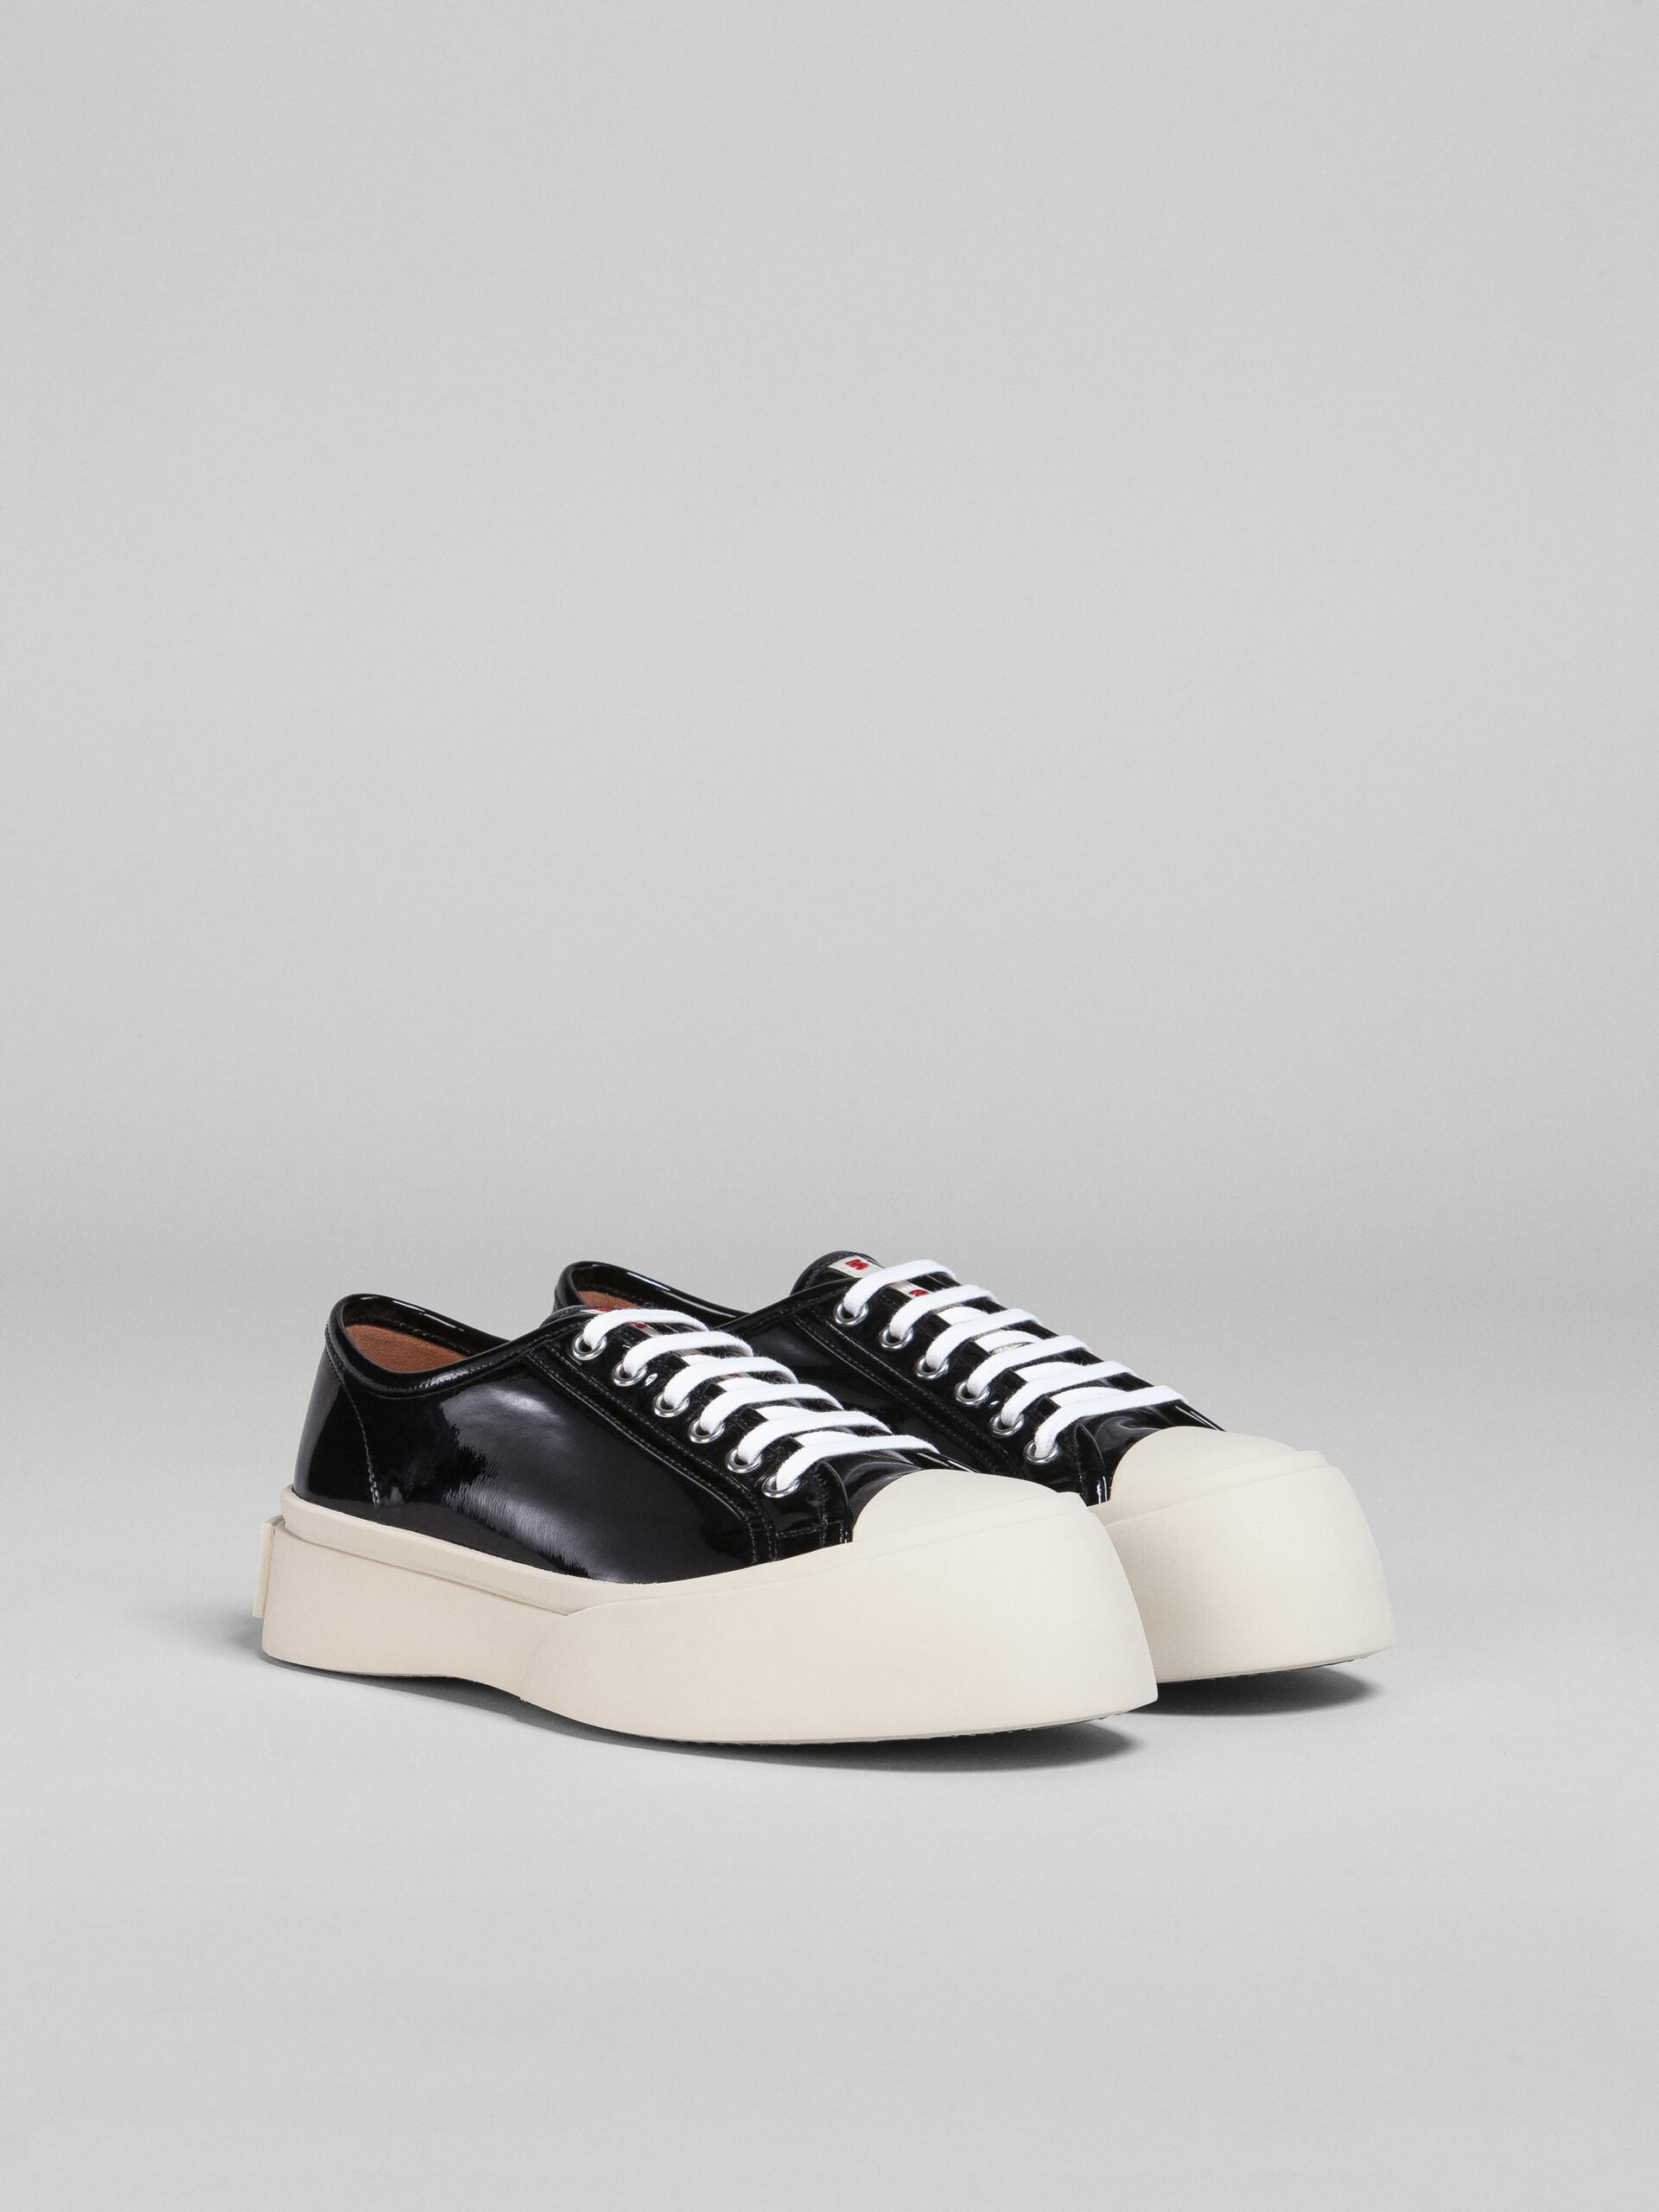 Black patent leather PABLO lace-up sneaker - Sneakers - Image 2